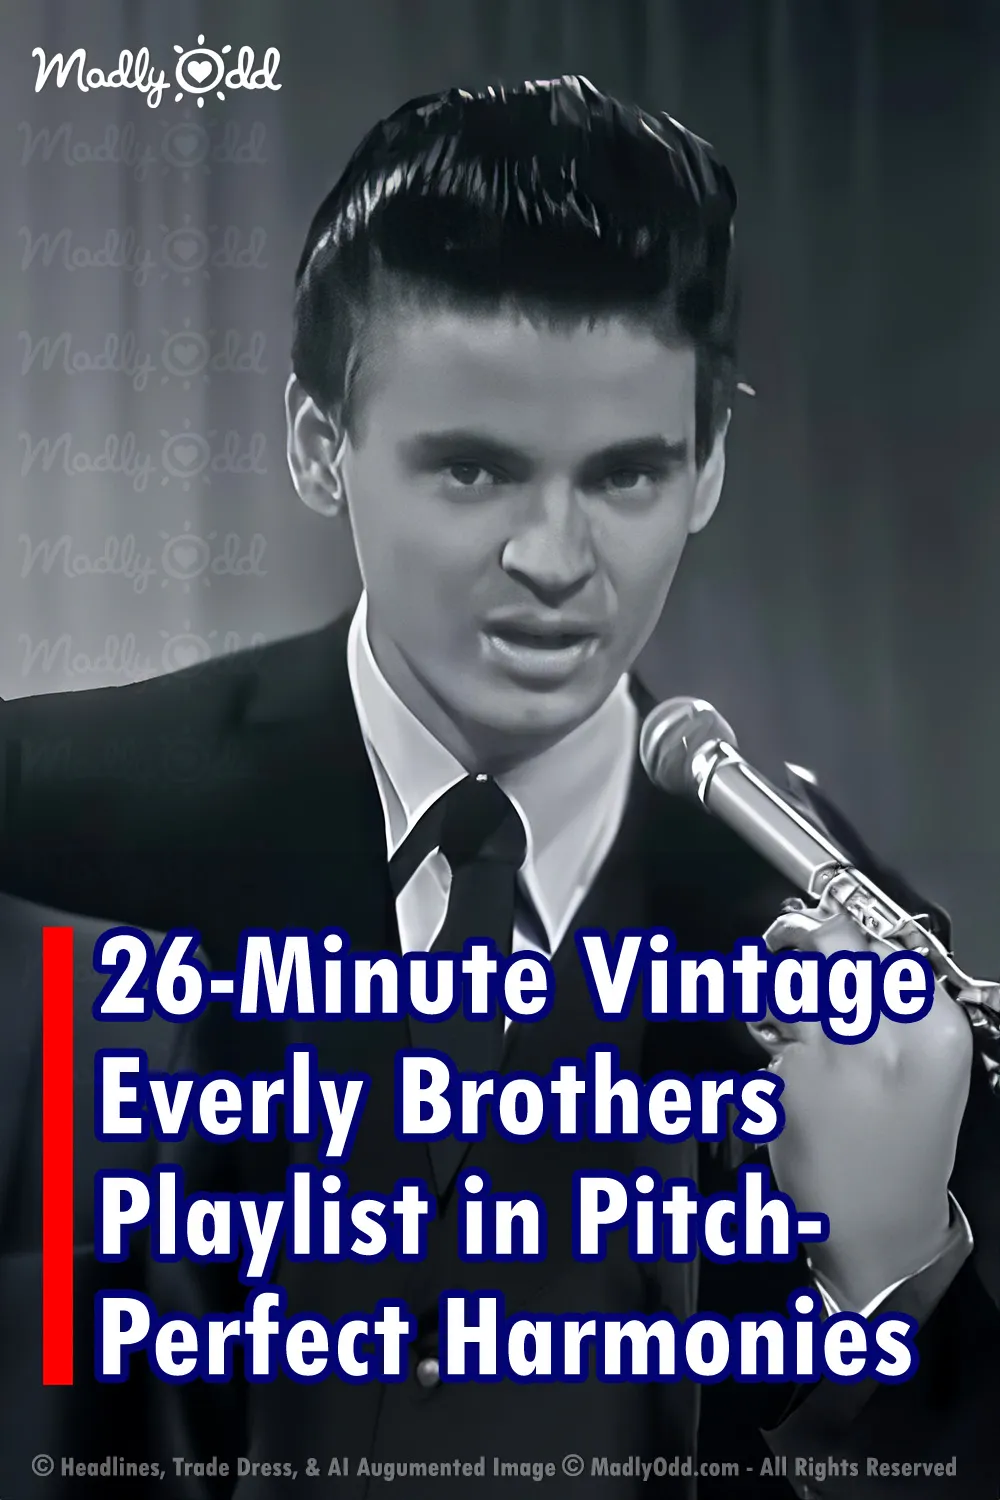 26-Minute Vintage Everly Brothers Playslist in Pitch- Perfect Harmonies